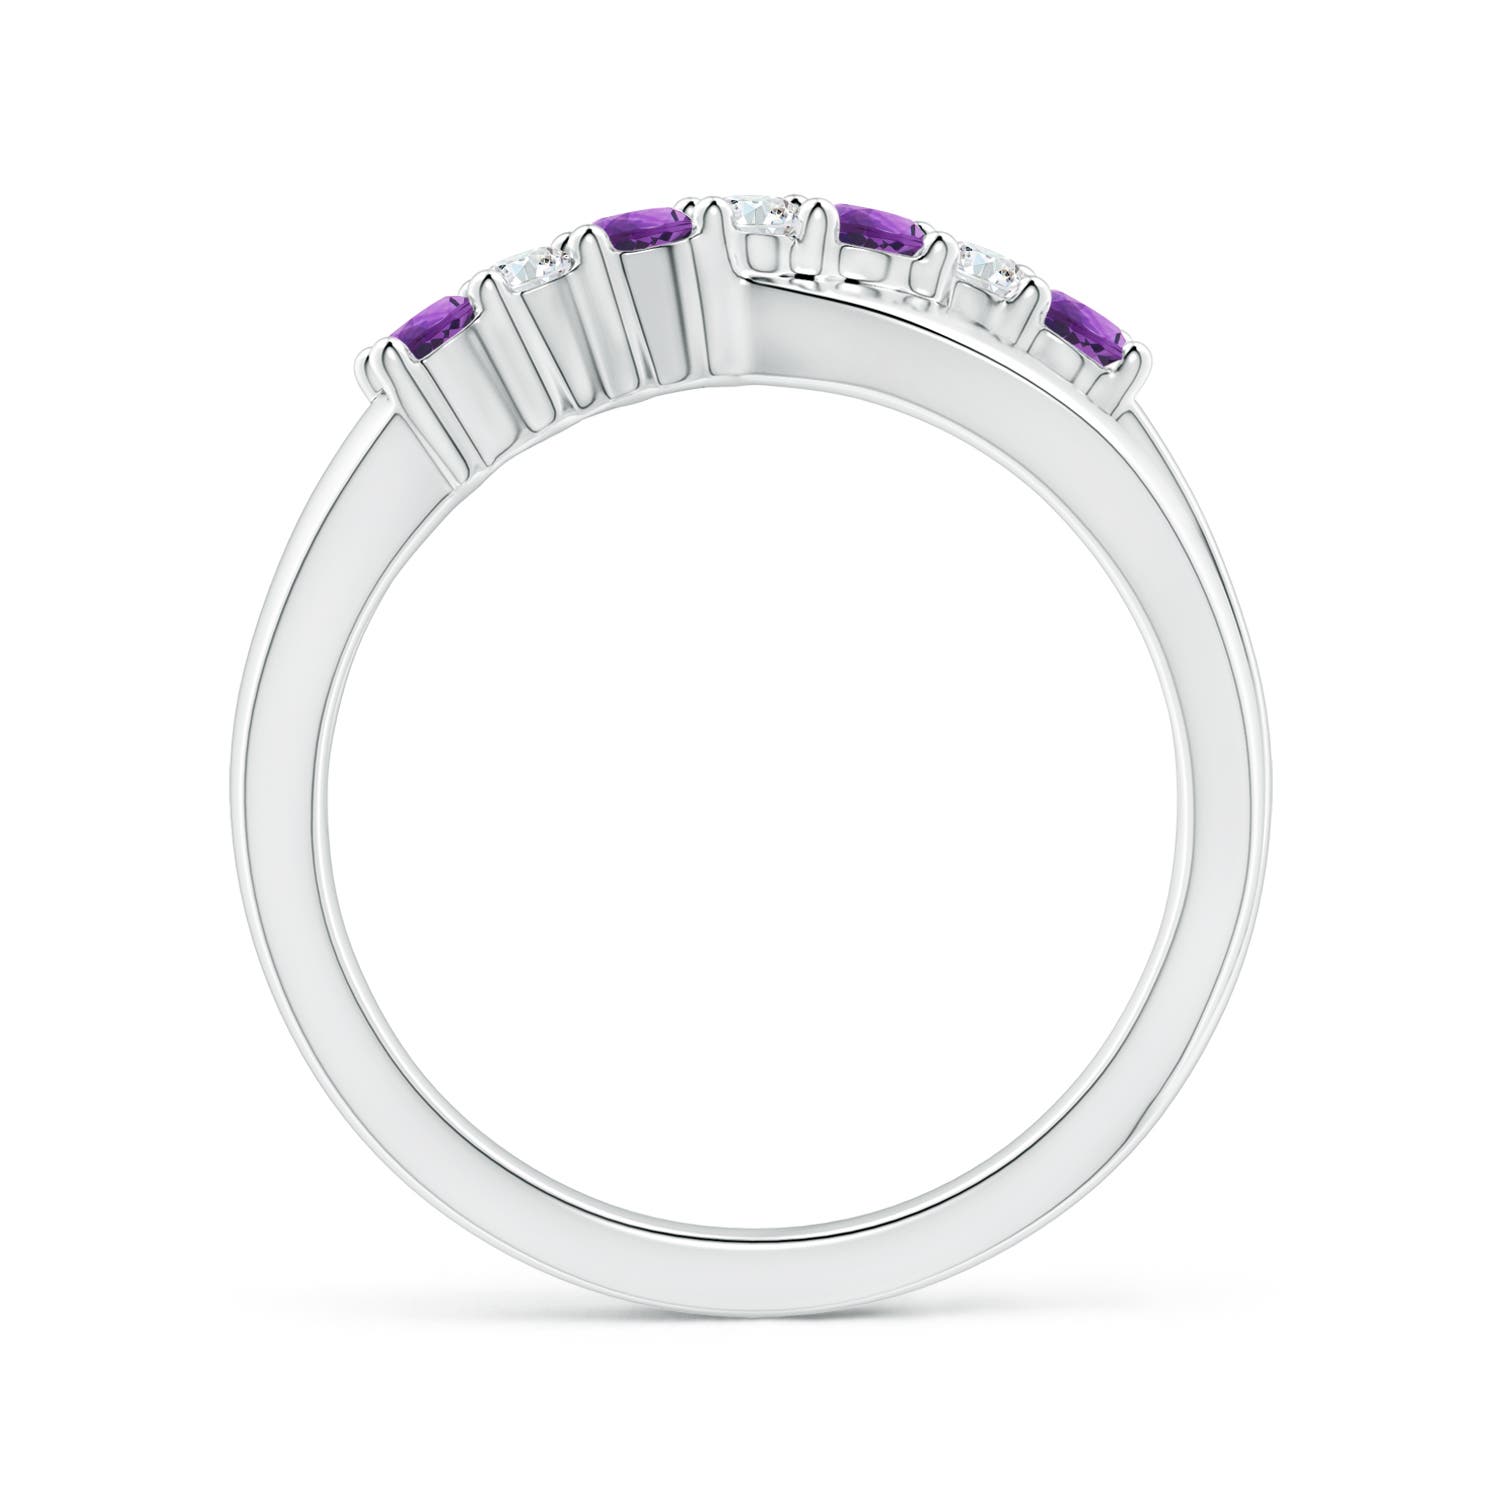 AAA - Amethyst / 0.36 CT / 14 KT White Gold